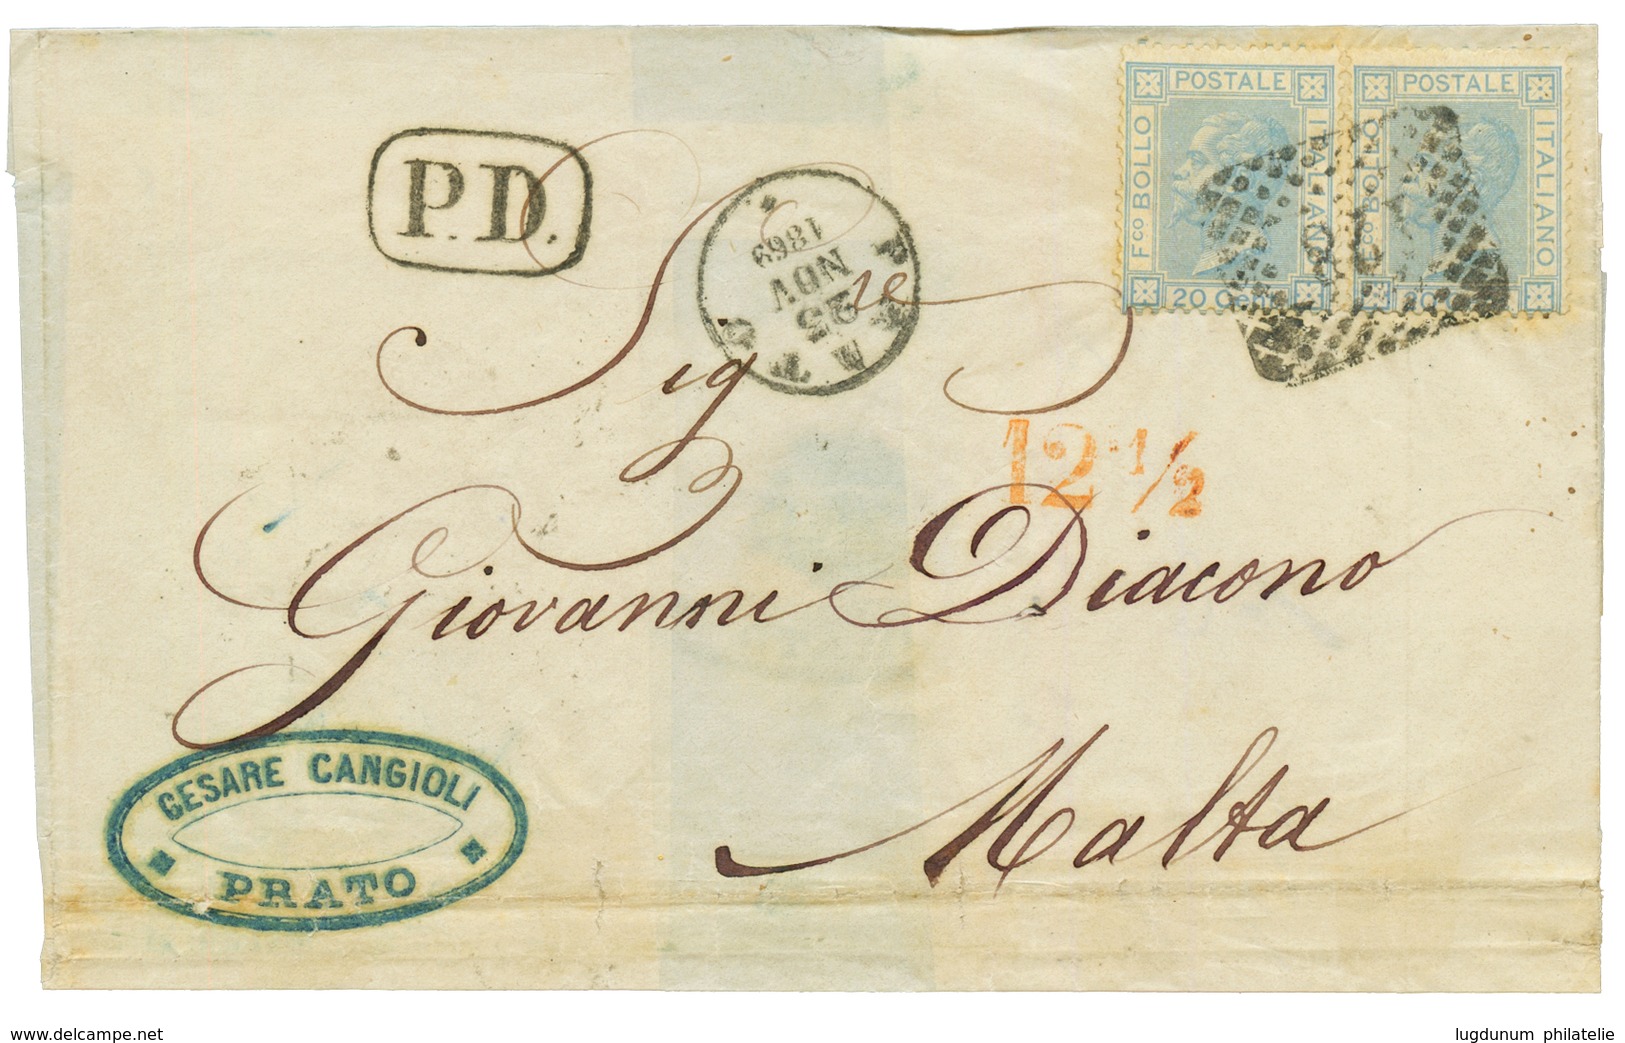 1869 ITALY 20c (x2) Canc. 128 + PRATO + "12 1/2" Tax Marking On Entire To MALTA. Vf. - Unclassified